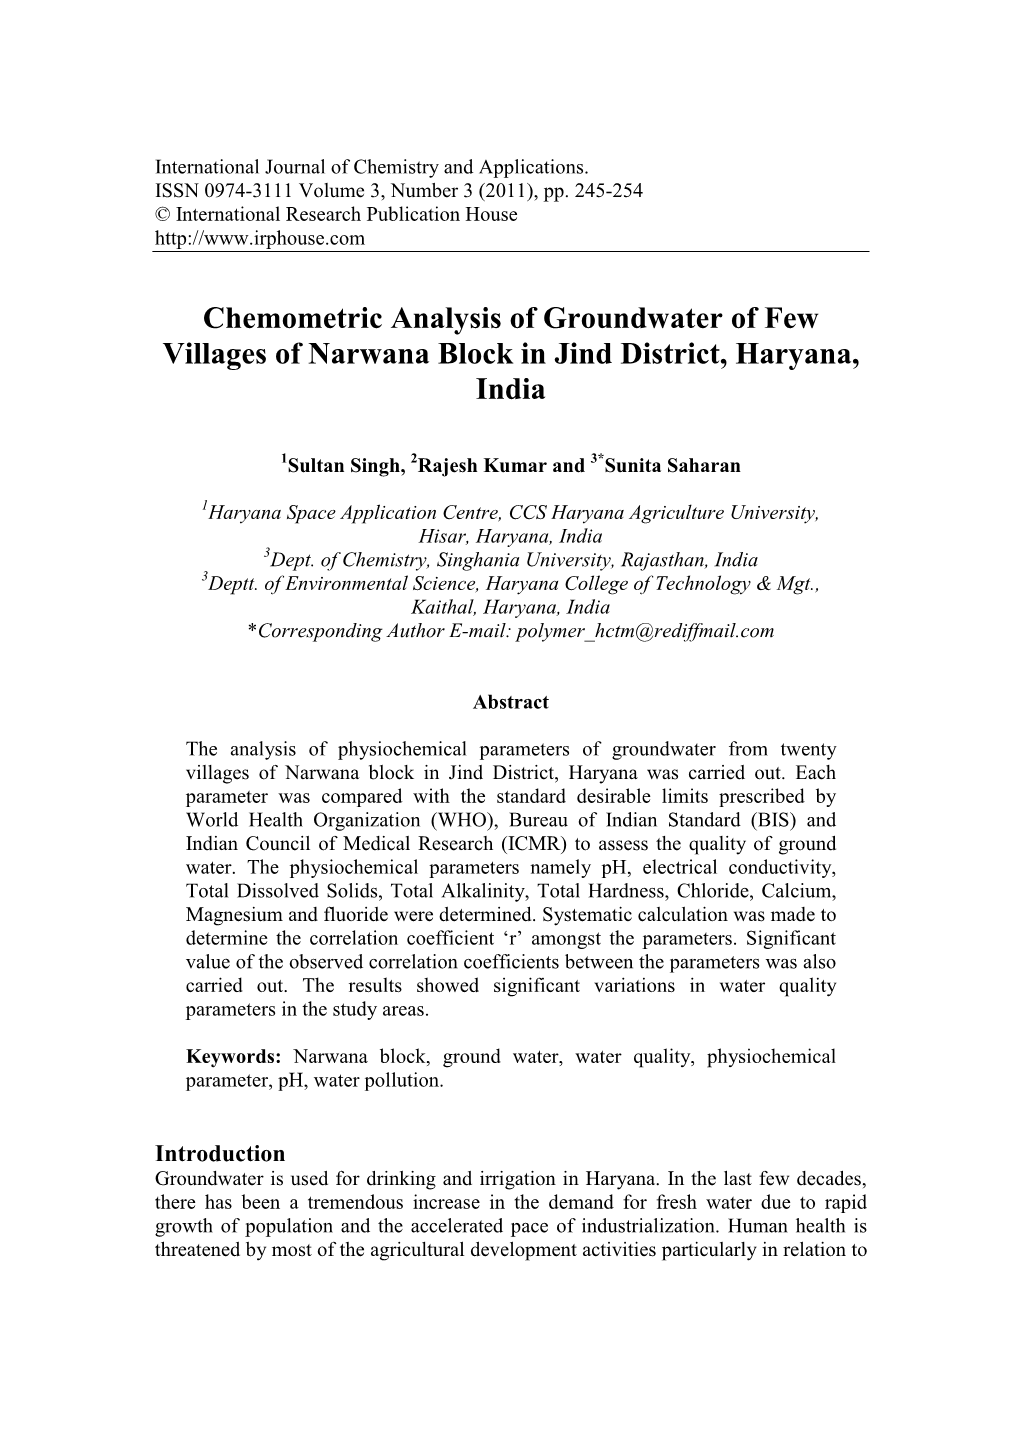 Chemometric Analysis of Groundwater of Few Villages of Narwana Block in Jind District, Haryana, India